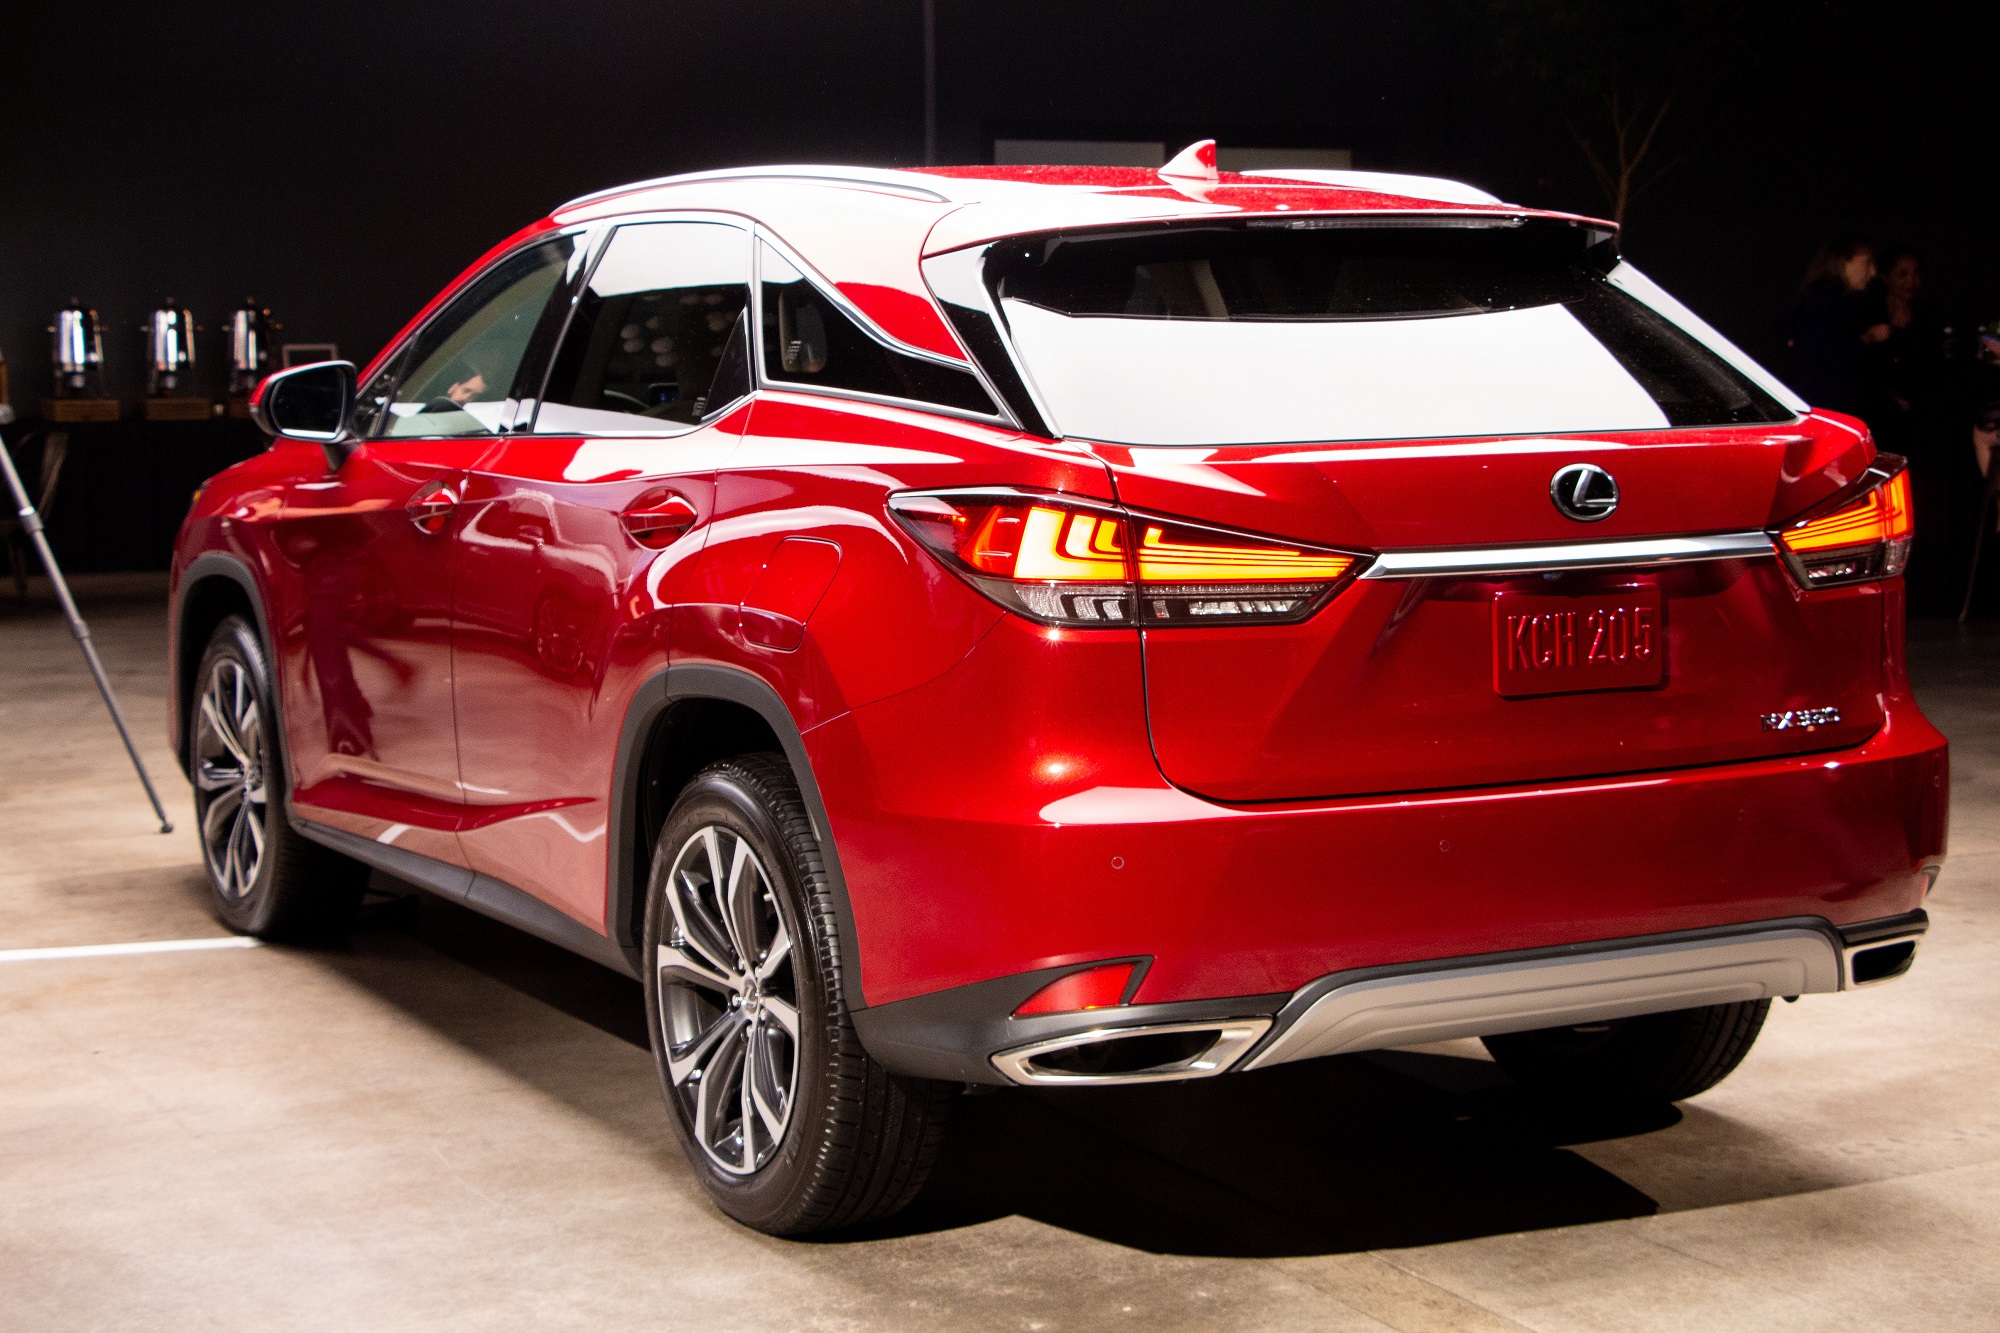 2020 Lexus Rx Unveiled With New Style And Crucial Tech